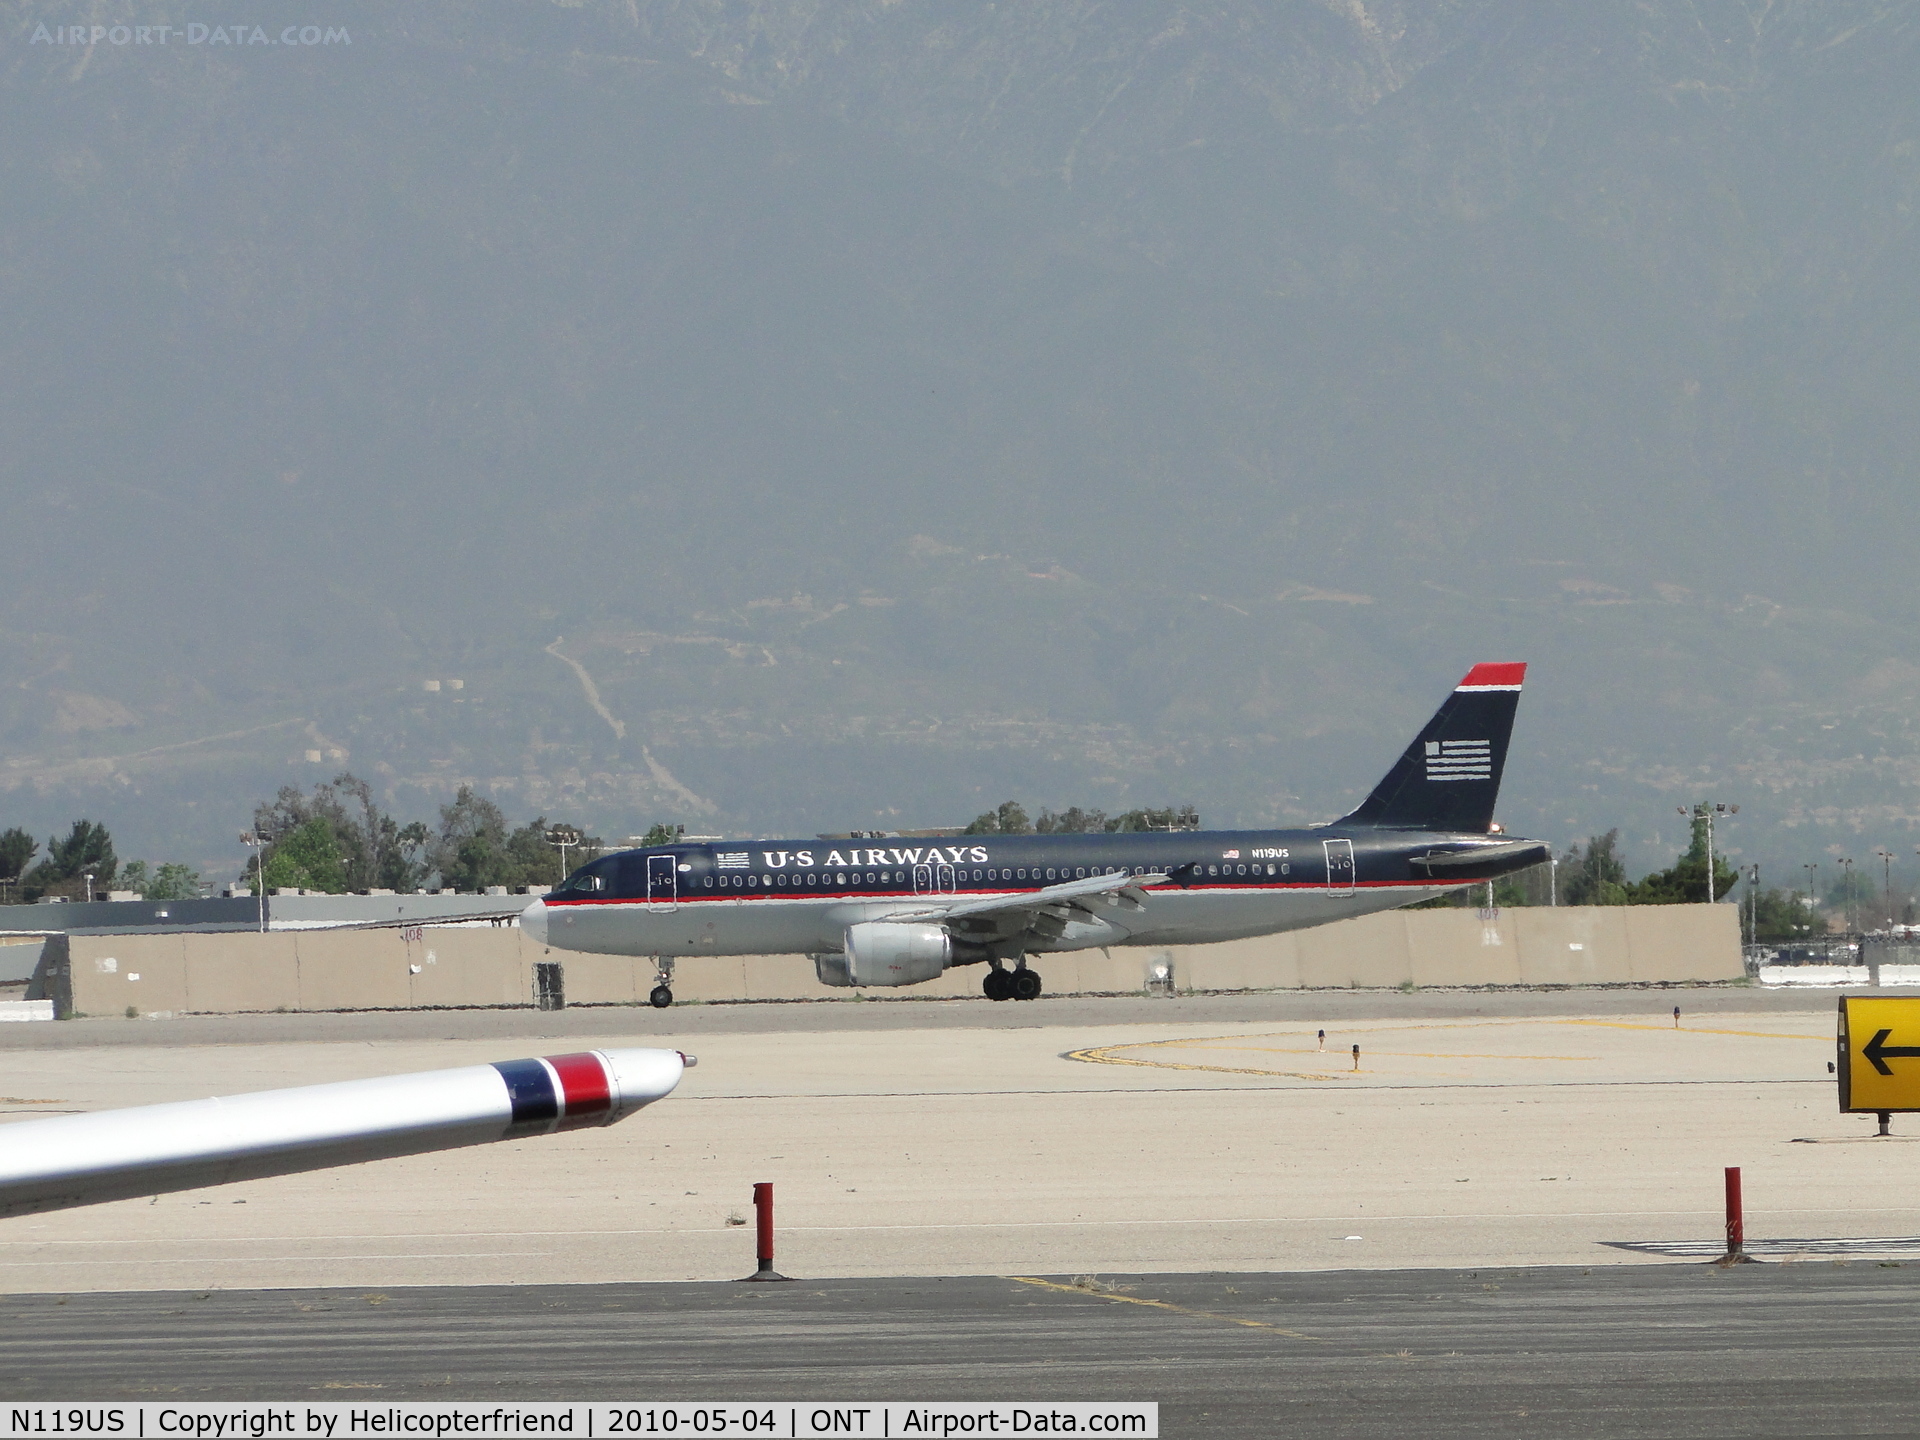 N119US, 2000 Airbus A320-214 C/N 1268, Rolling out after landing on runway 26R